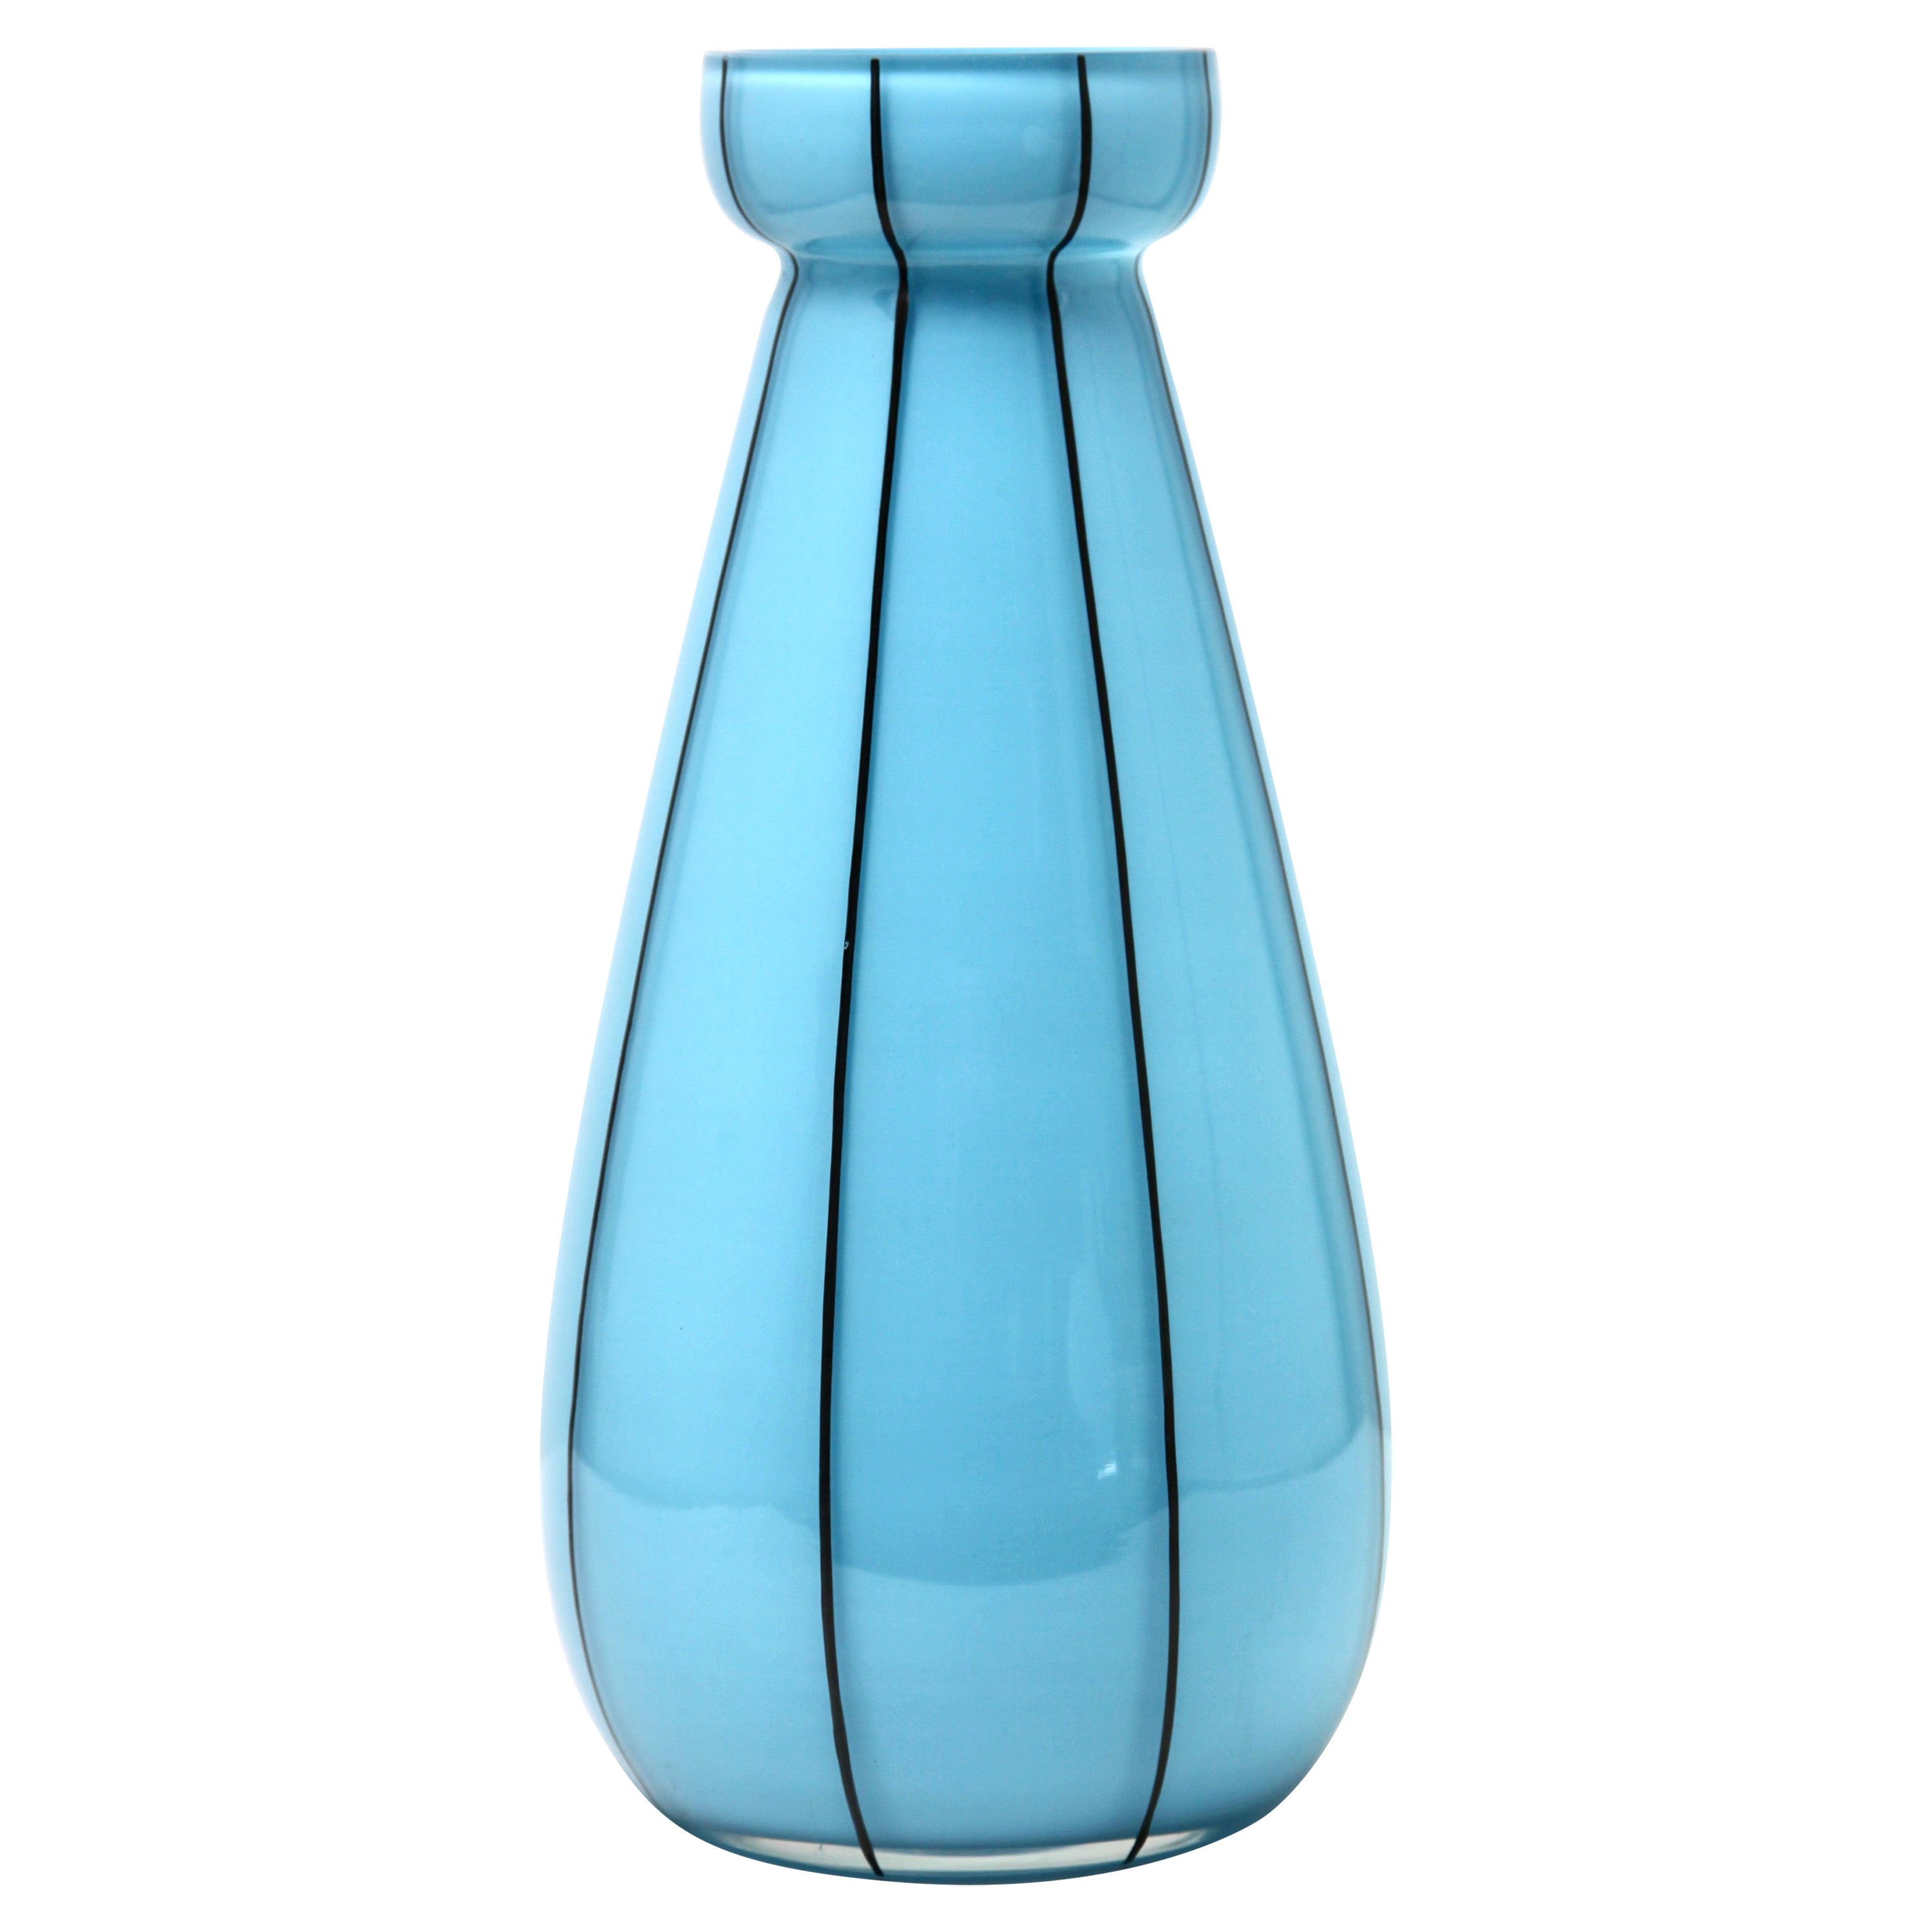 Opaline Glass 'hand painted decorated' Vases in Baby Blue, France For Sale